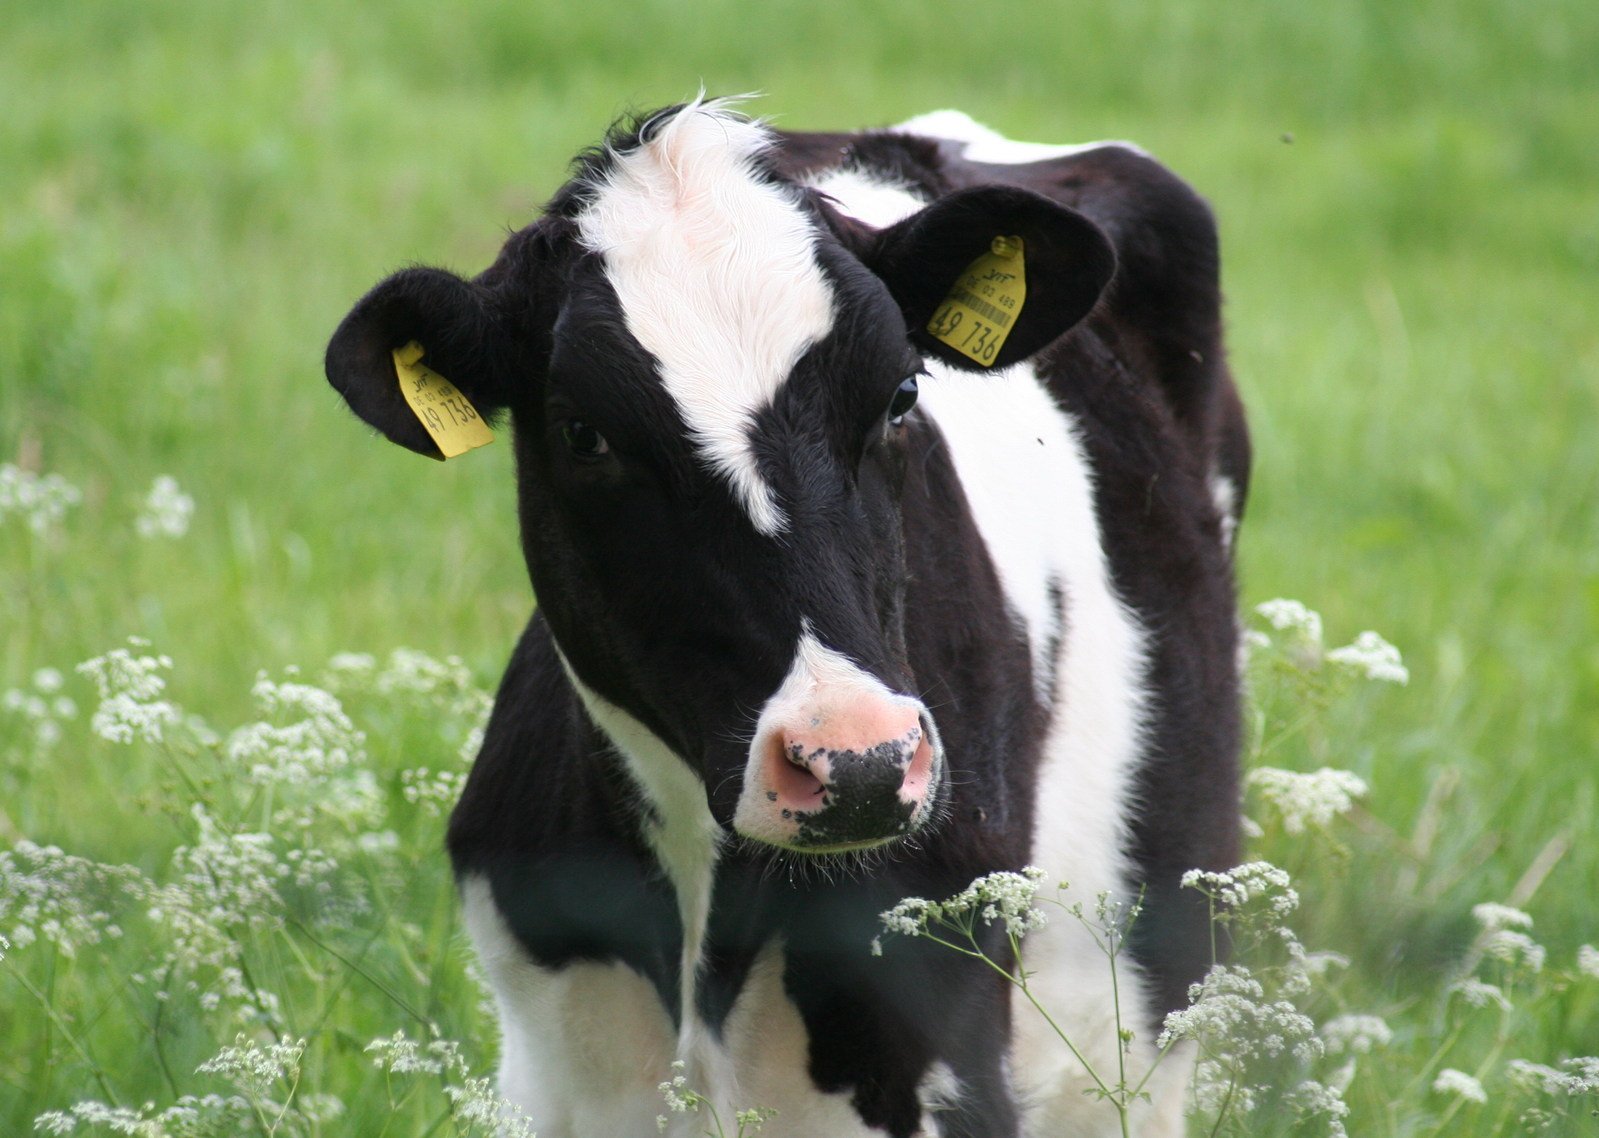 a close up of a cow in a field of grass